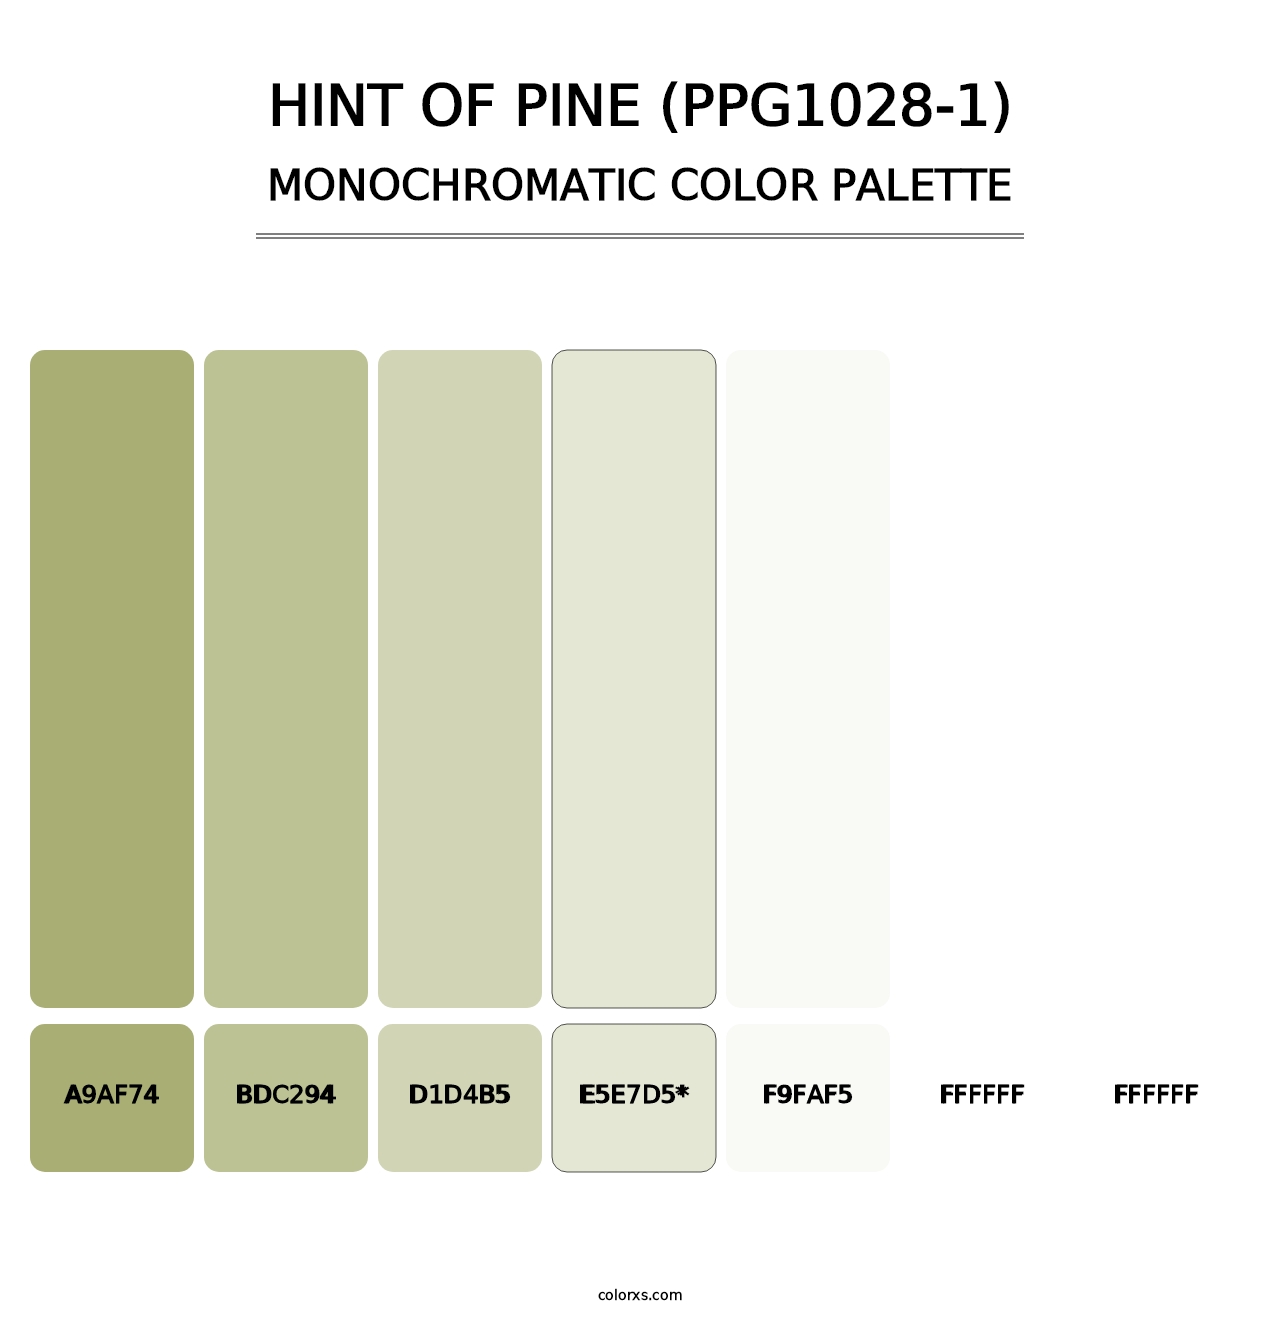 Hint Of Pine (PPG1028-1) - Monochromatic Color Palette